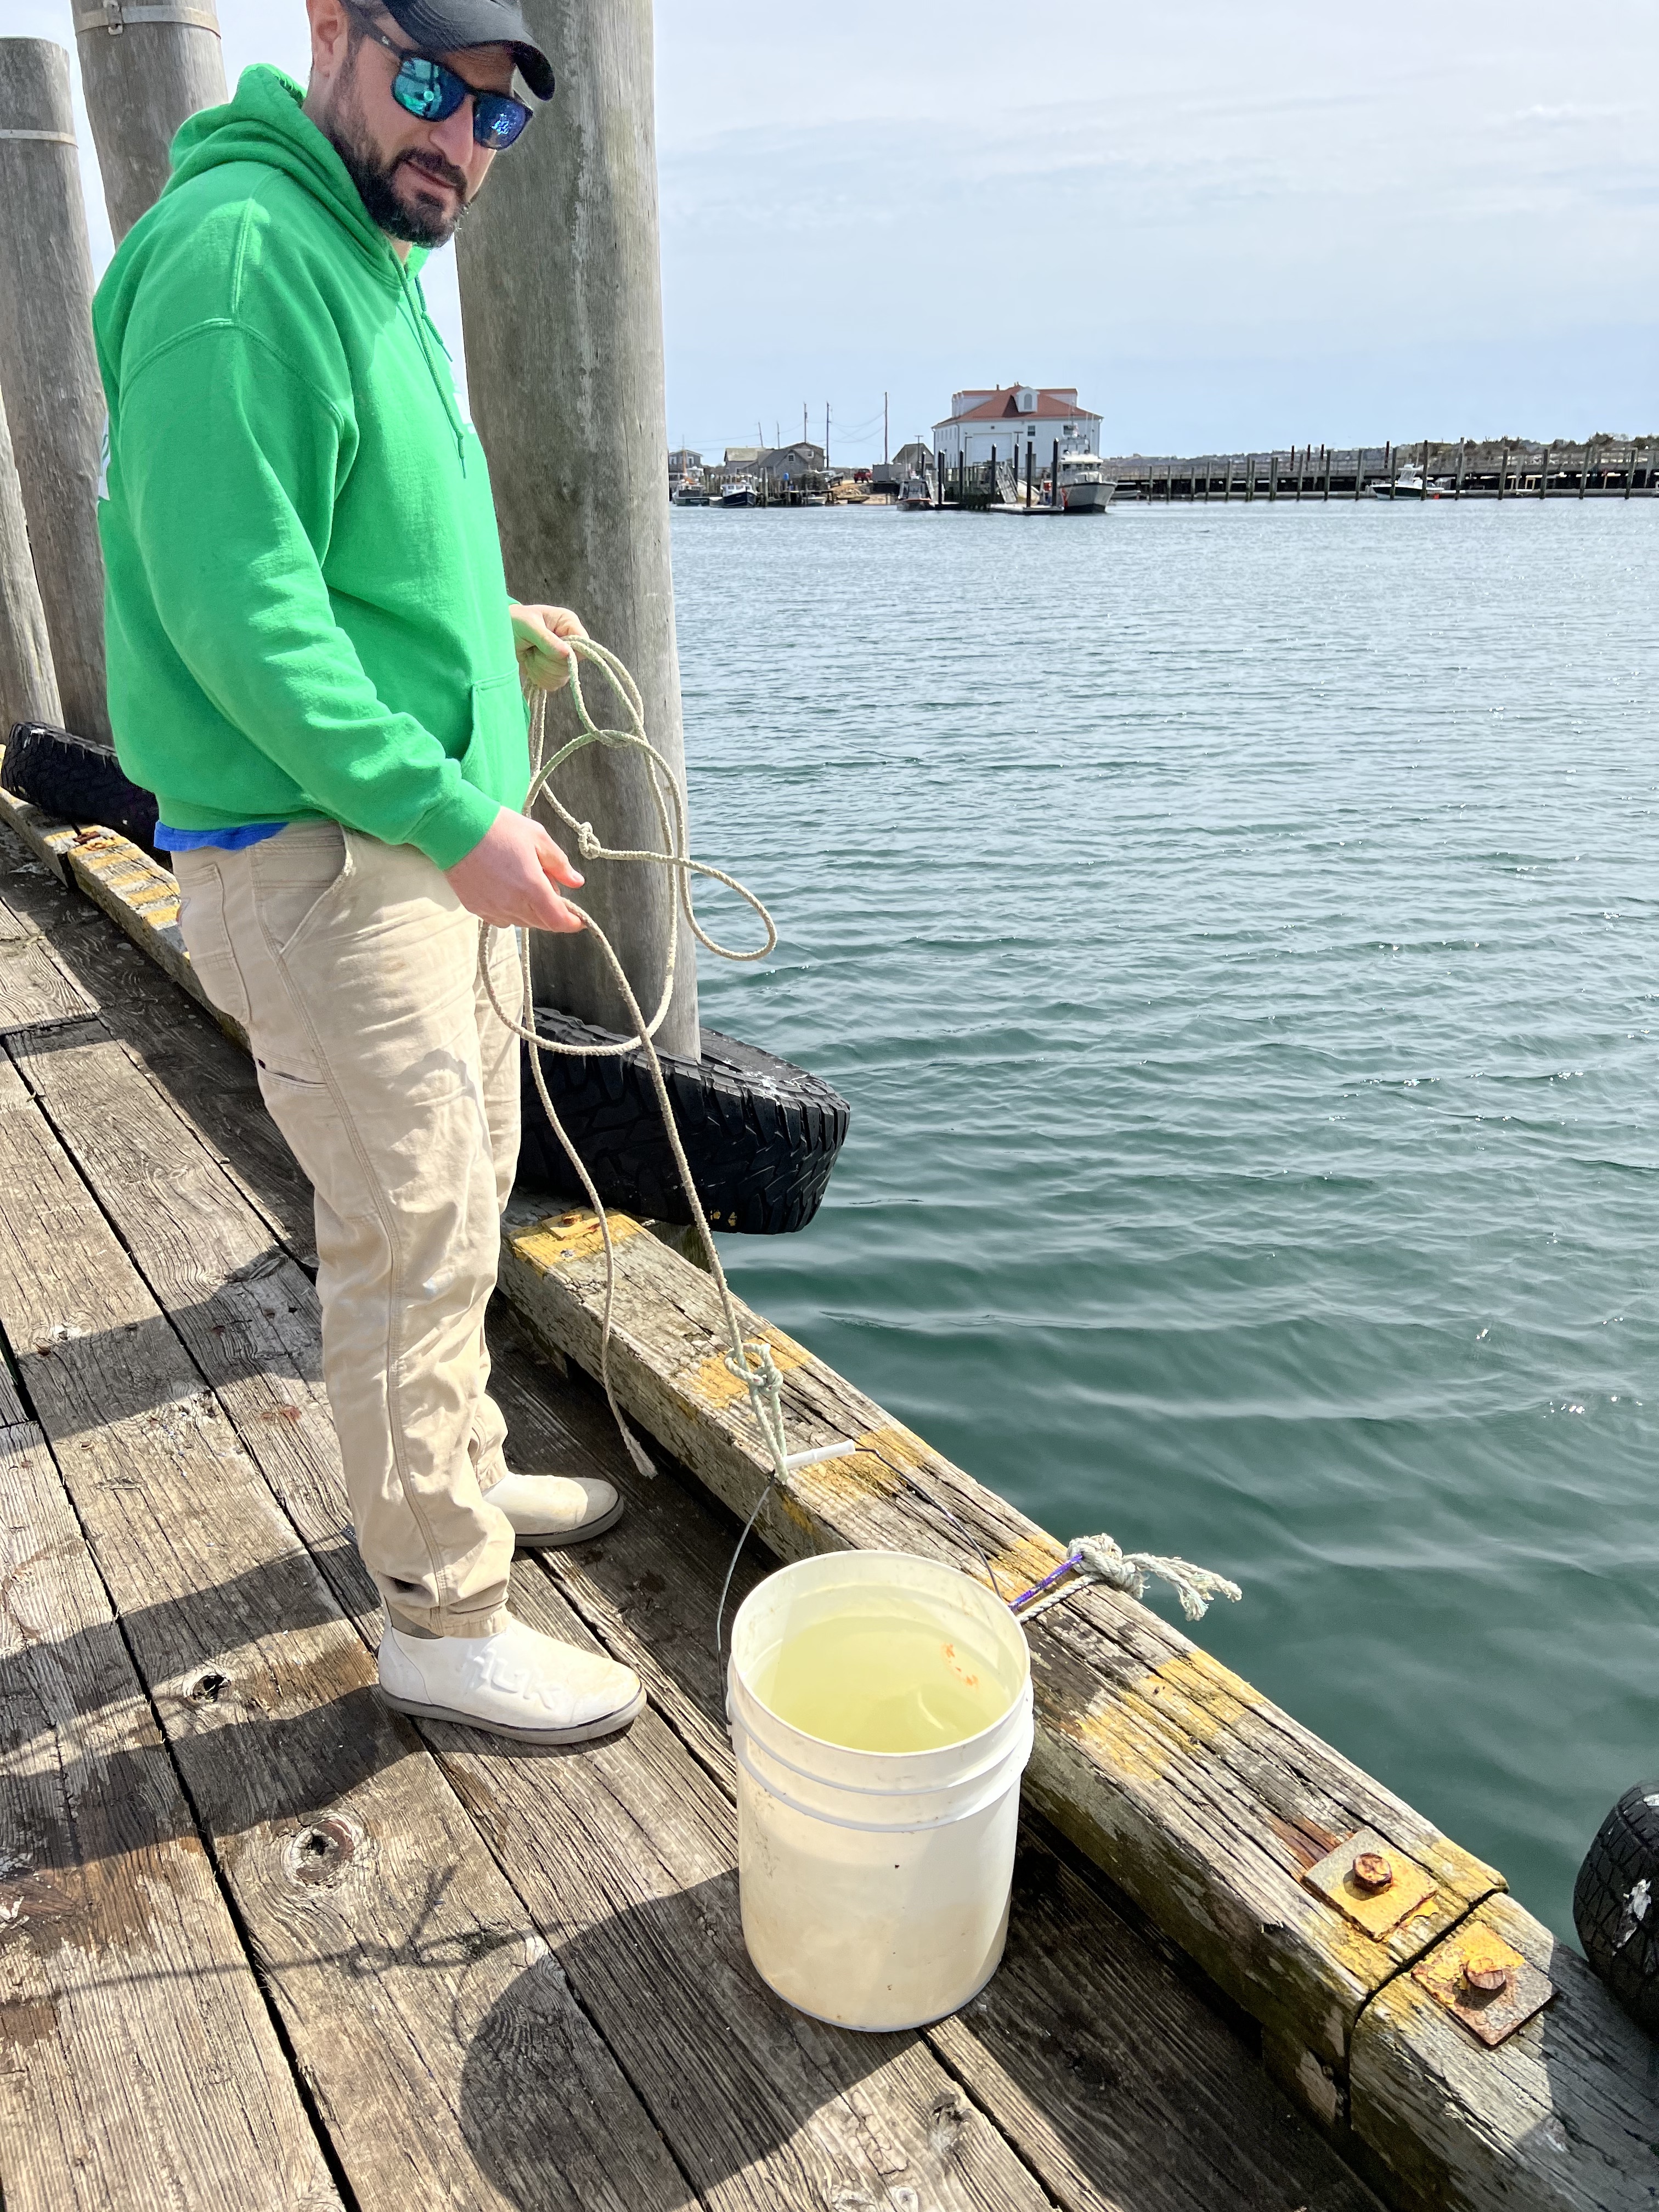 Peter Lambos collects water from Menemsha Harbor where Fred Littleton was Harbor Master